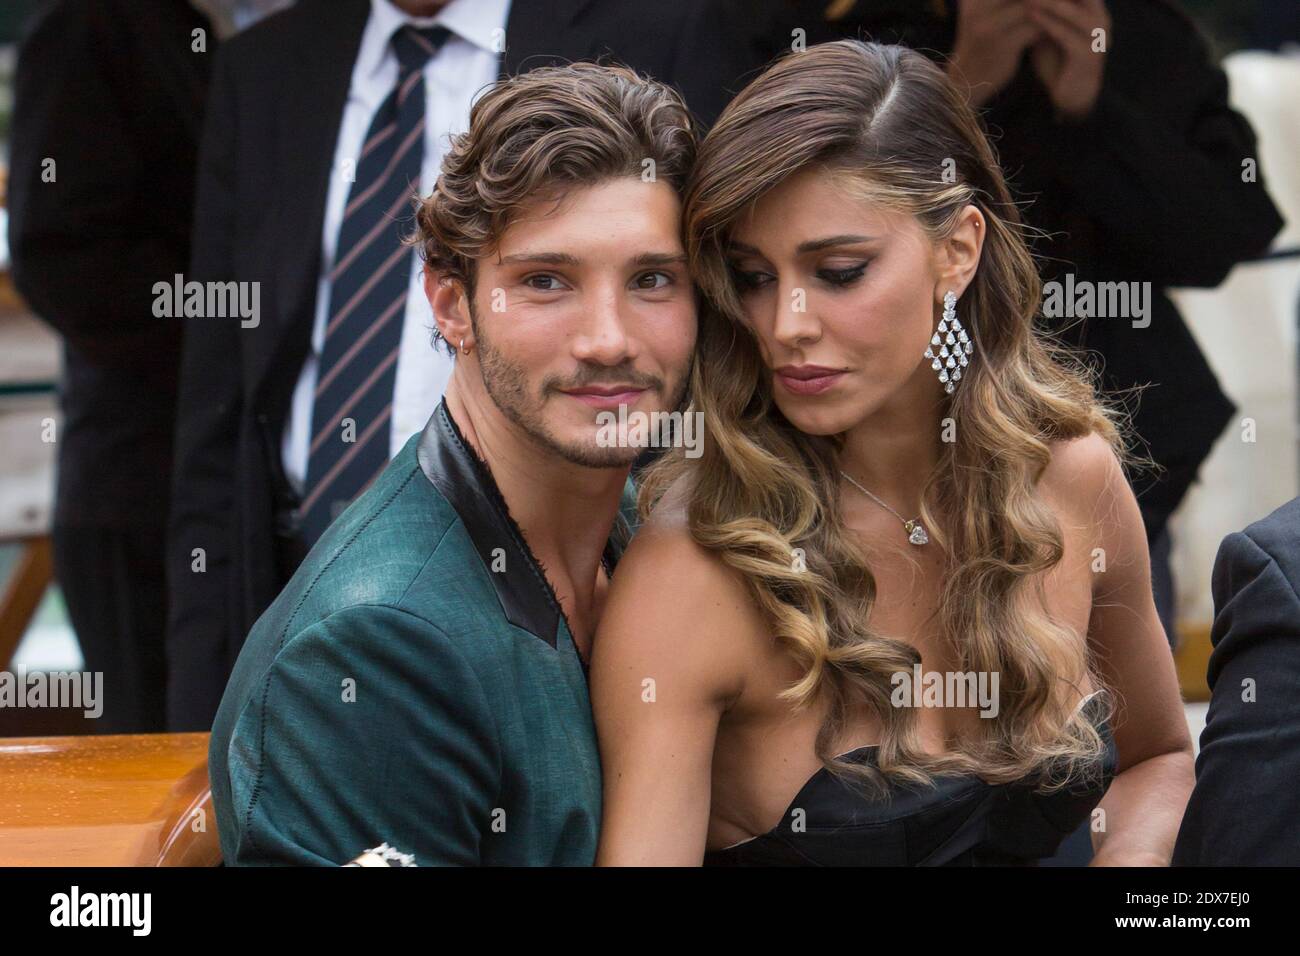 Stefano De Martino, Belen Rodriguez arriving to the Excelsior Pier during the 71st Venice Film Festival in Venice, Italy, September 4, 2014. Photo by Marco Piovanotto/ABACAPRESS.COM Stock Photo